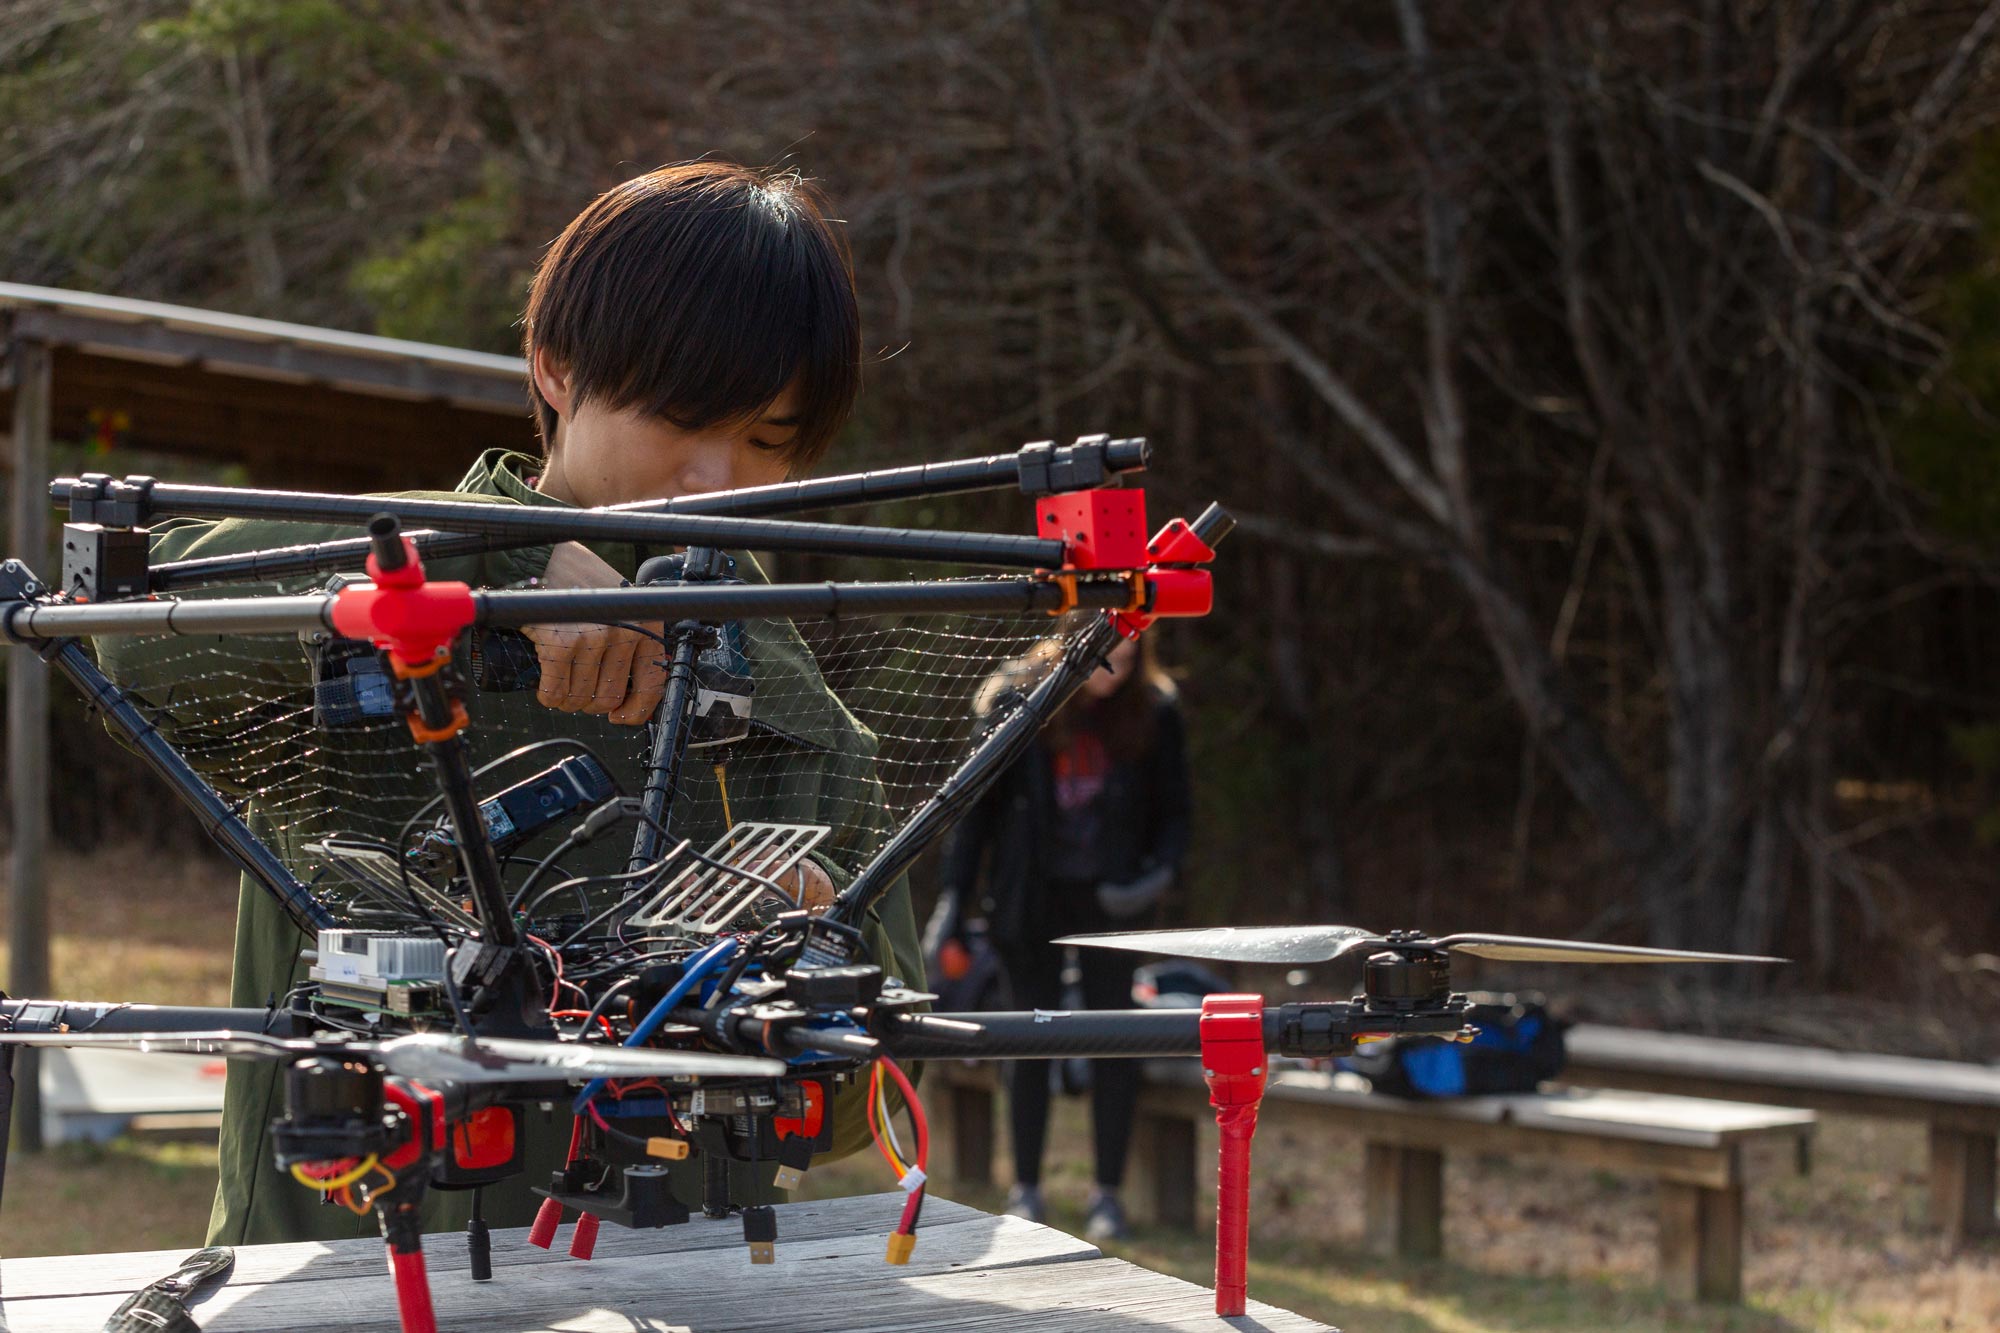 A student from Team VICTOR works on an aerial drone on a table